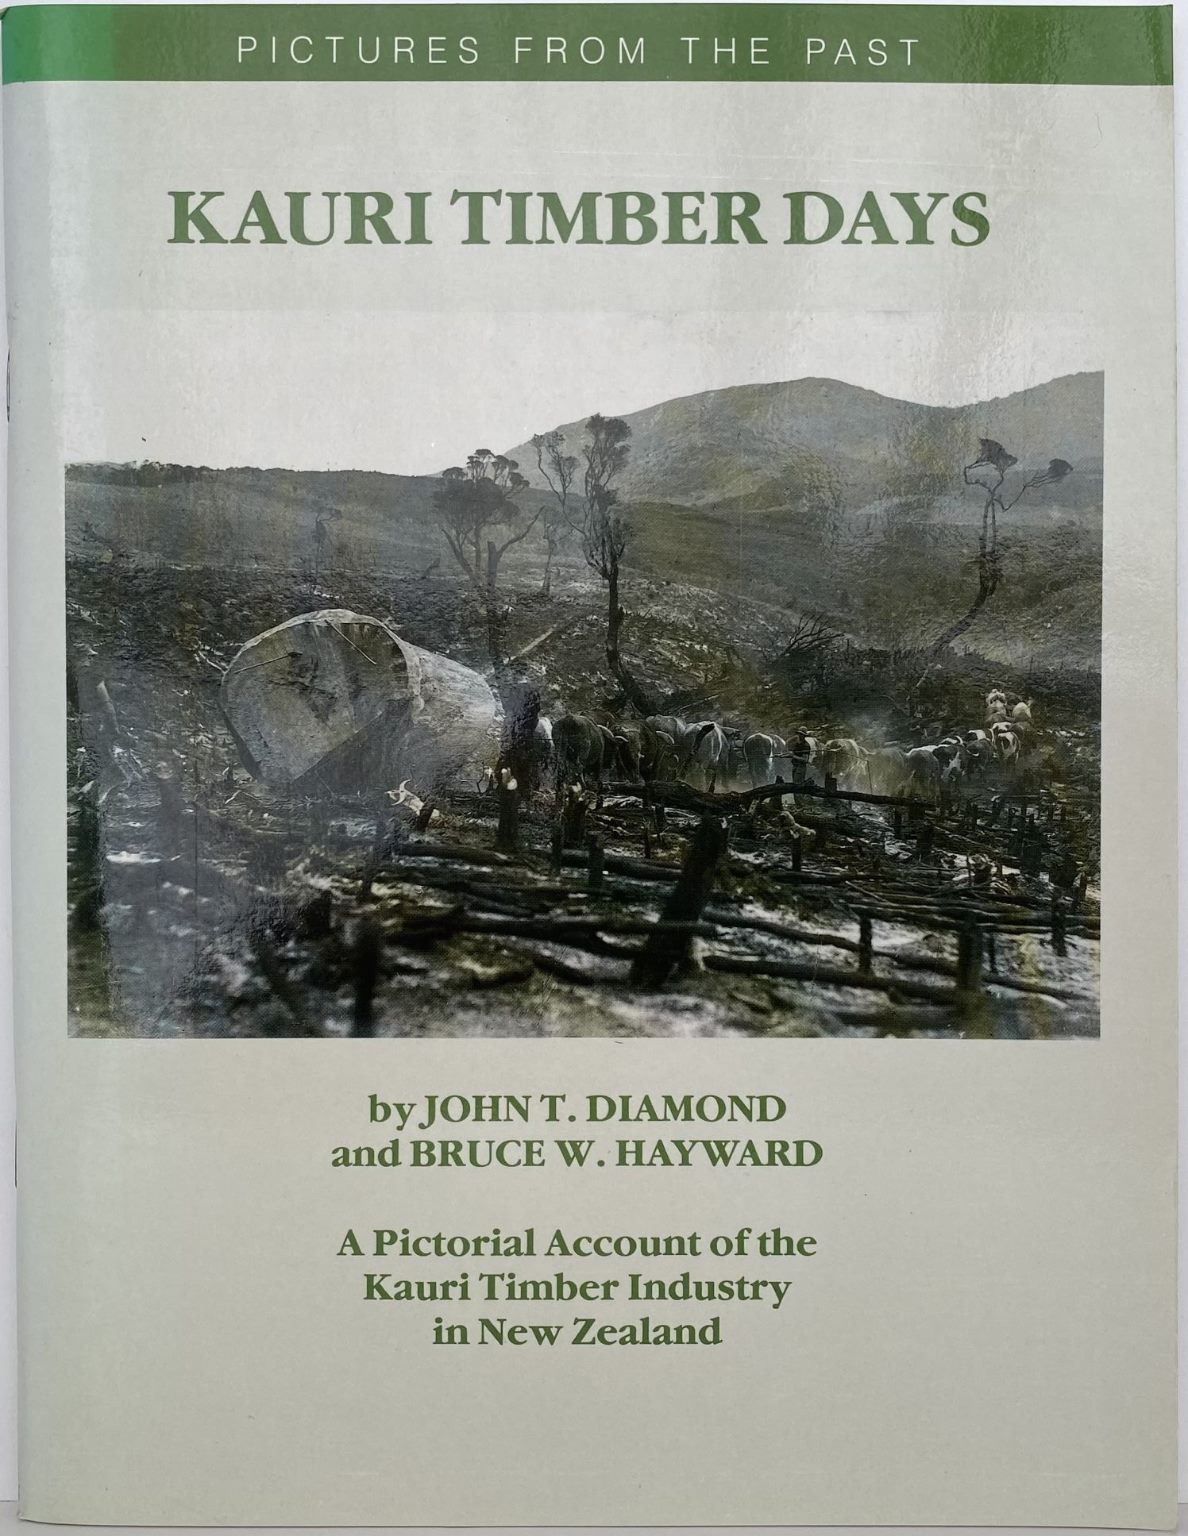 KAURI TIMBER DAYS: An Account of the Kauri Timber Industry in New Zealand